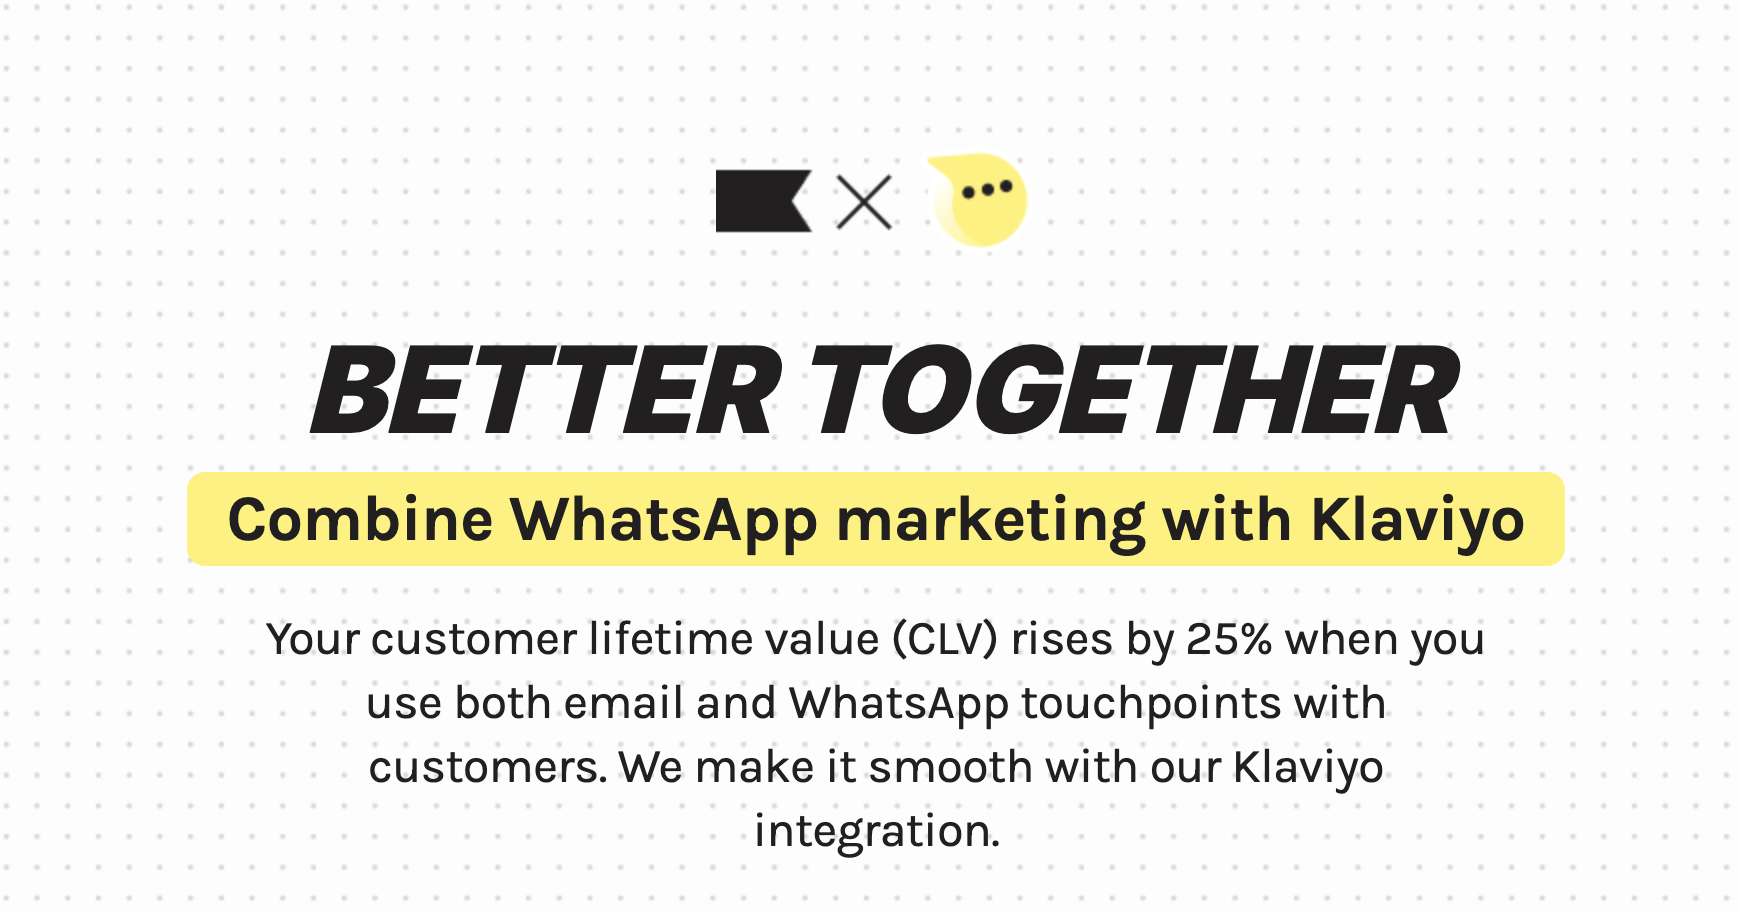 charles and Klaviyo offer a WhatsApp email integration for brands